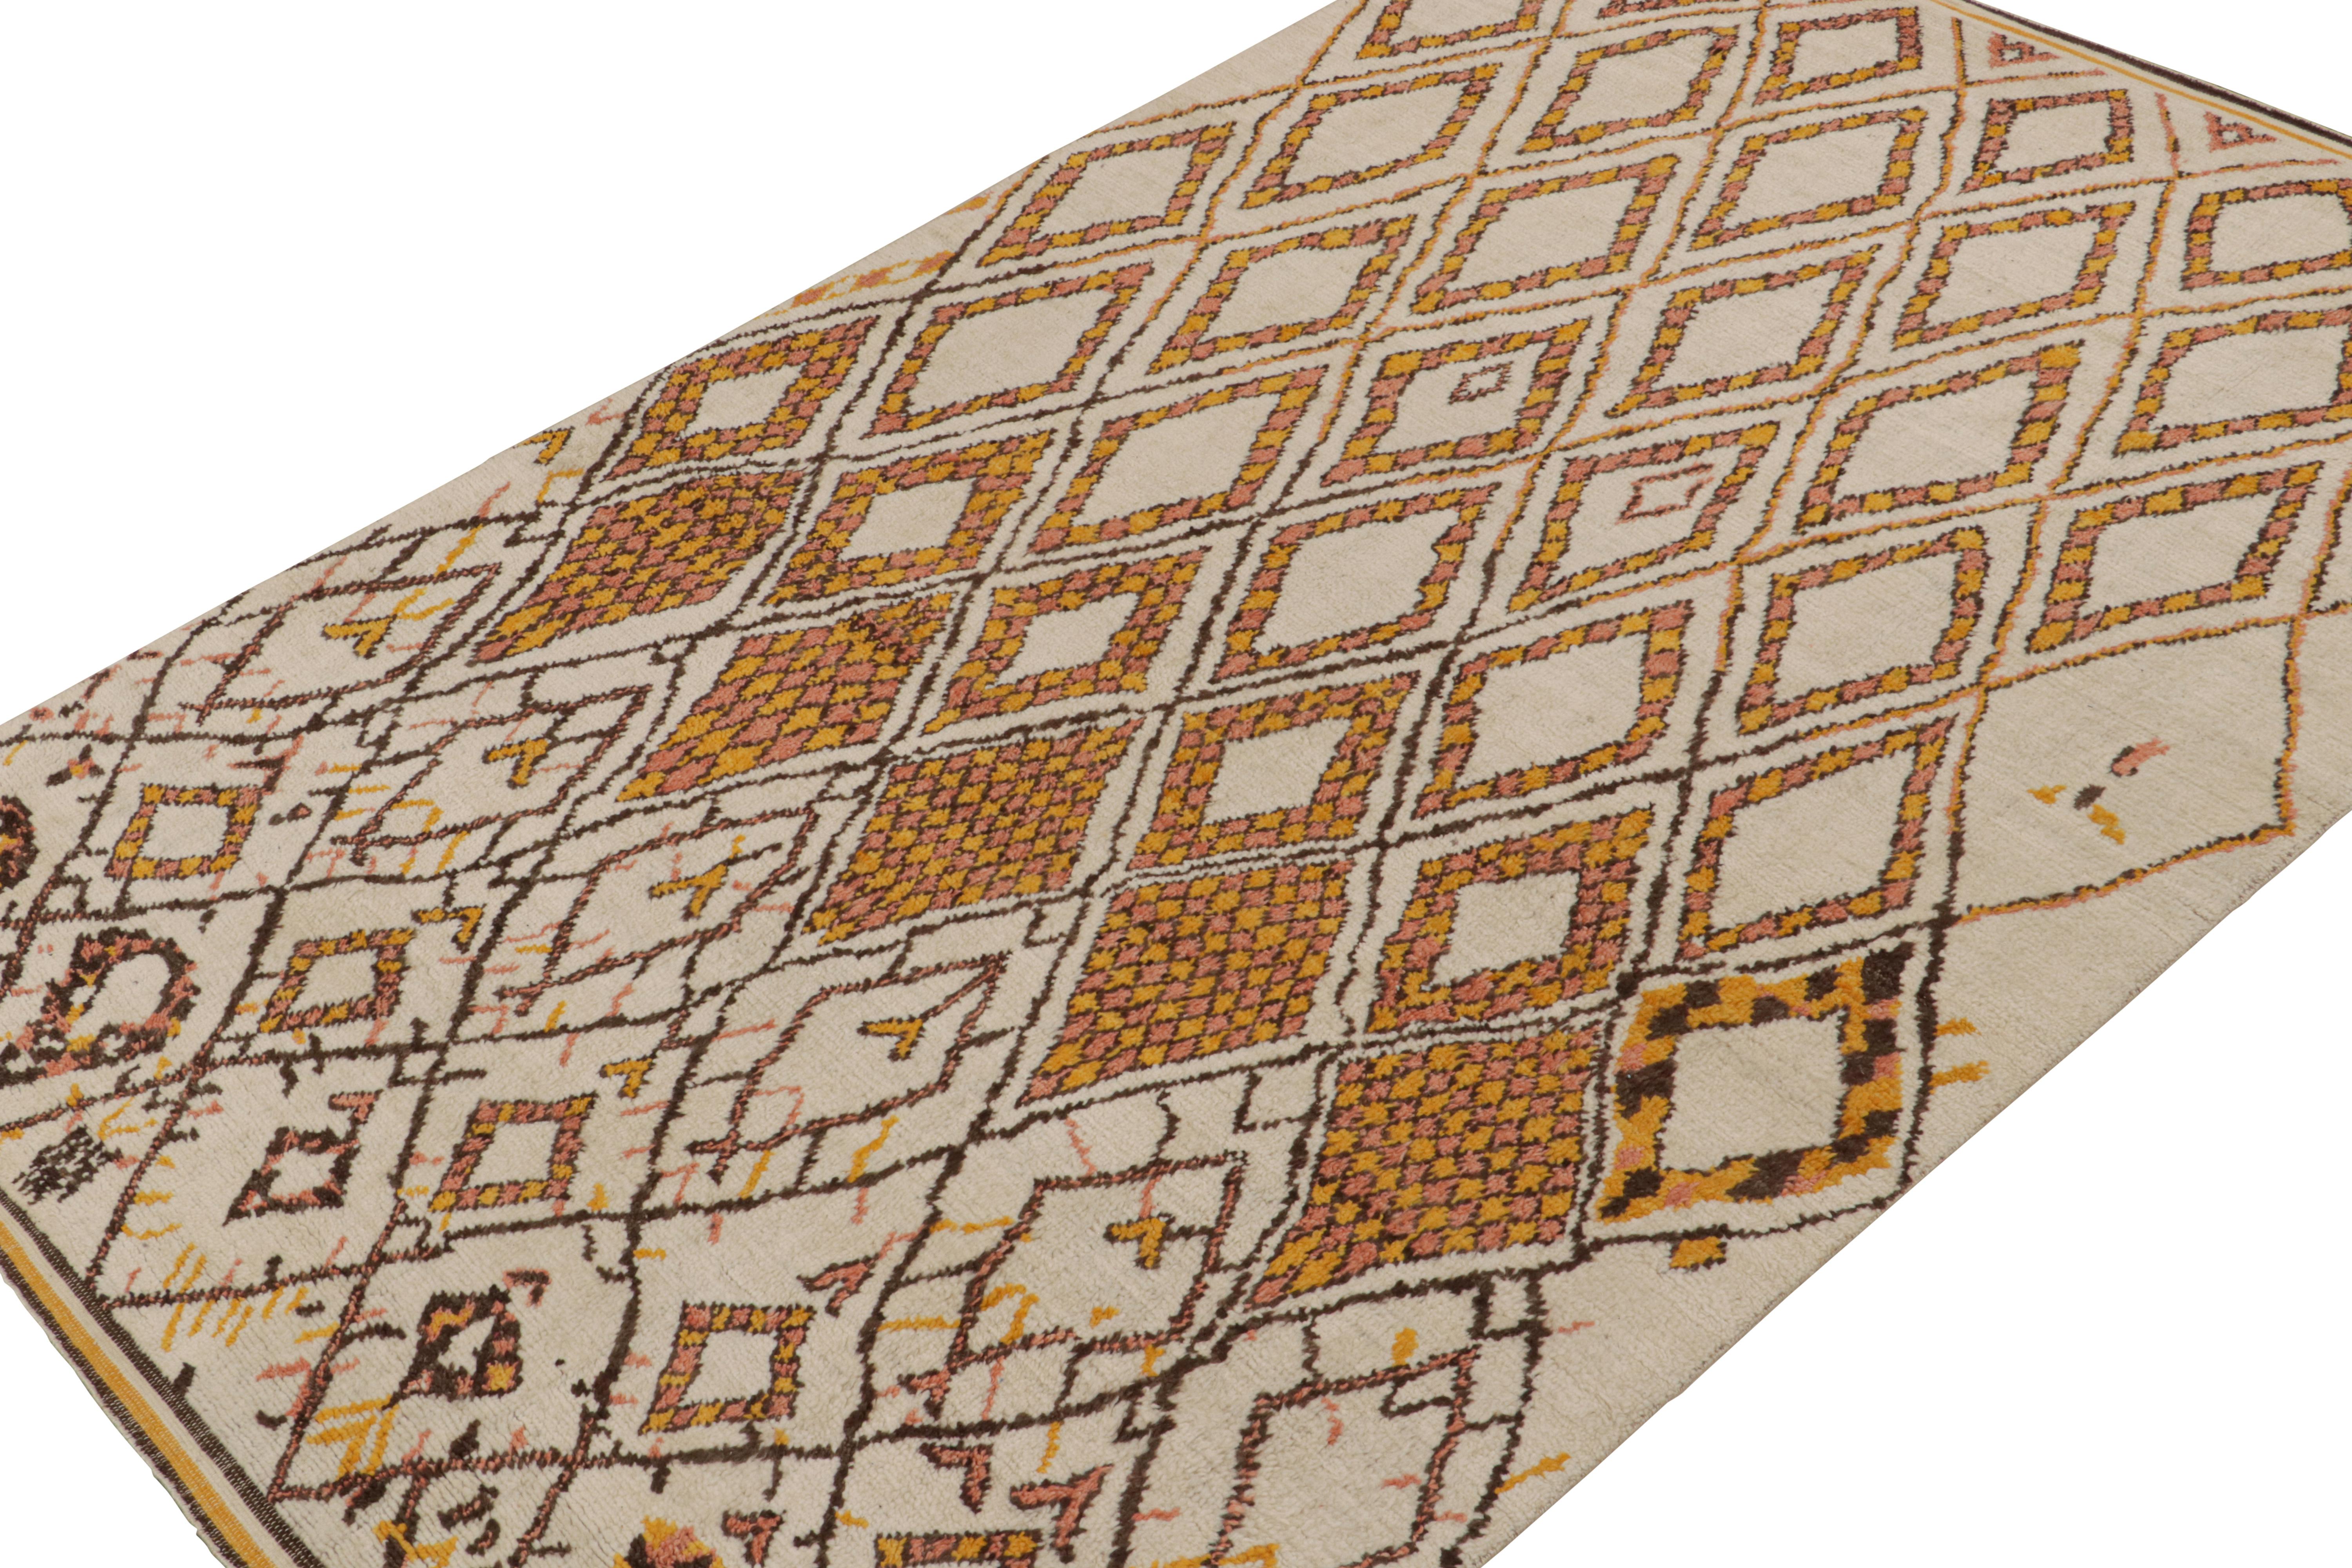 Hand-knotted in wool, this 8x12 rug is a new addition to the Moroccan Collection by Rug & Kilim. 

On the Design

This rug enjoys primitivist style with brown-gold patterns on a cream backdrop. Connoisseurs will admire this as a modern take on the